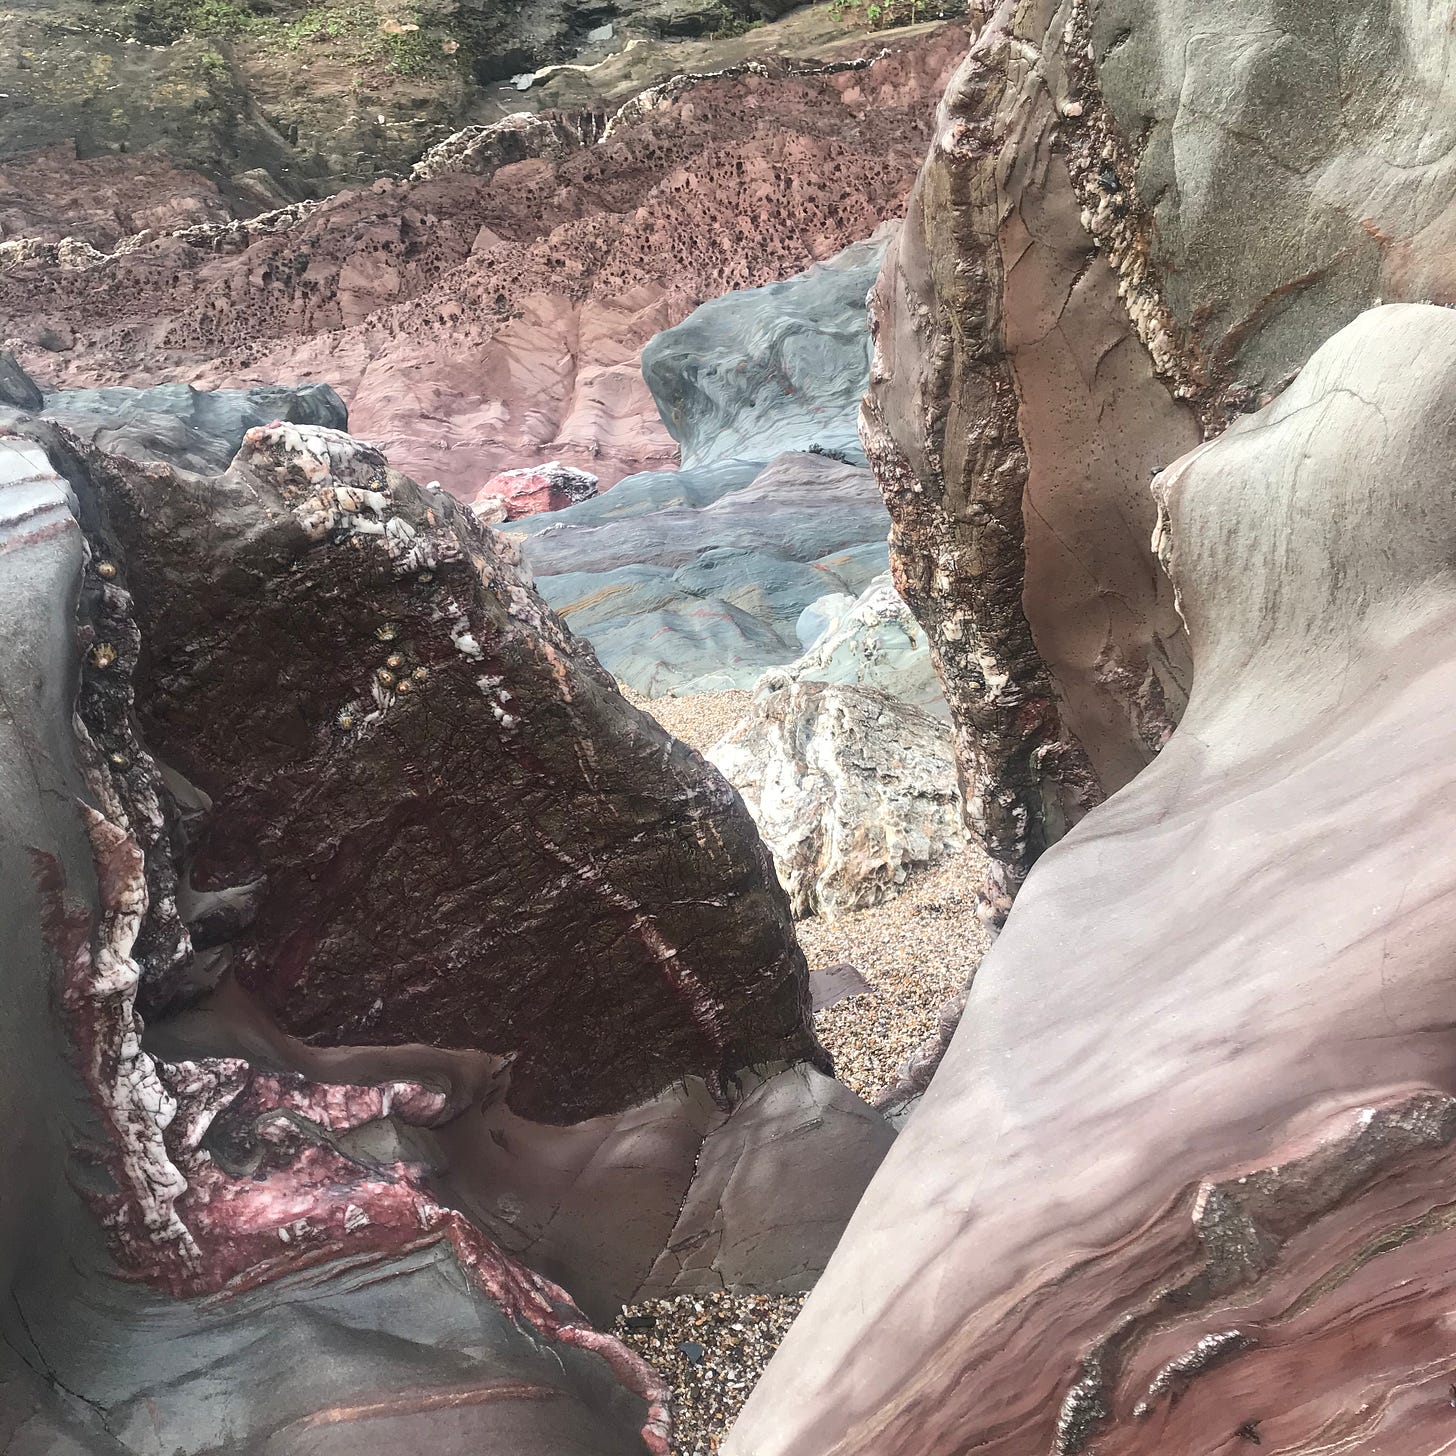 A photo of rock formations on a Devon beach. The rocks are red and grey with lines of sediment